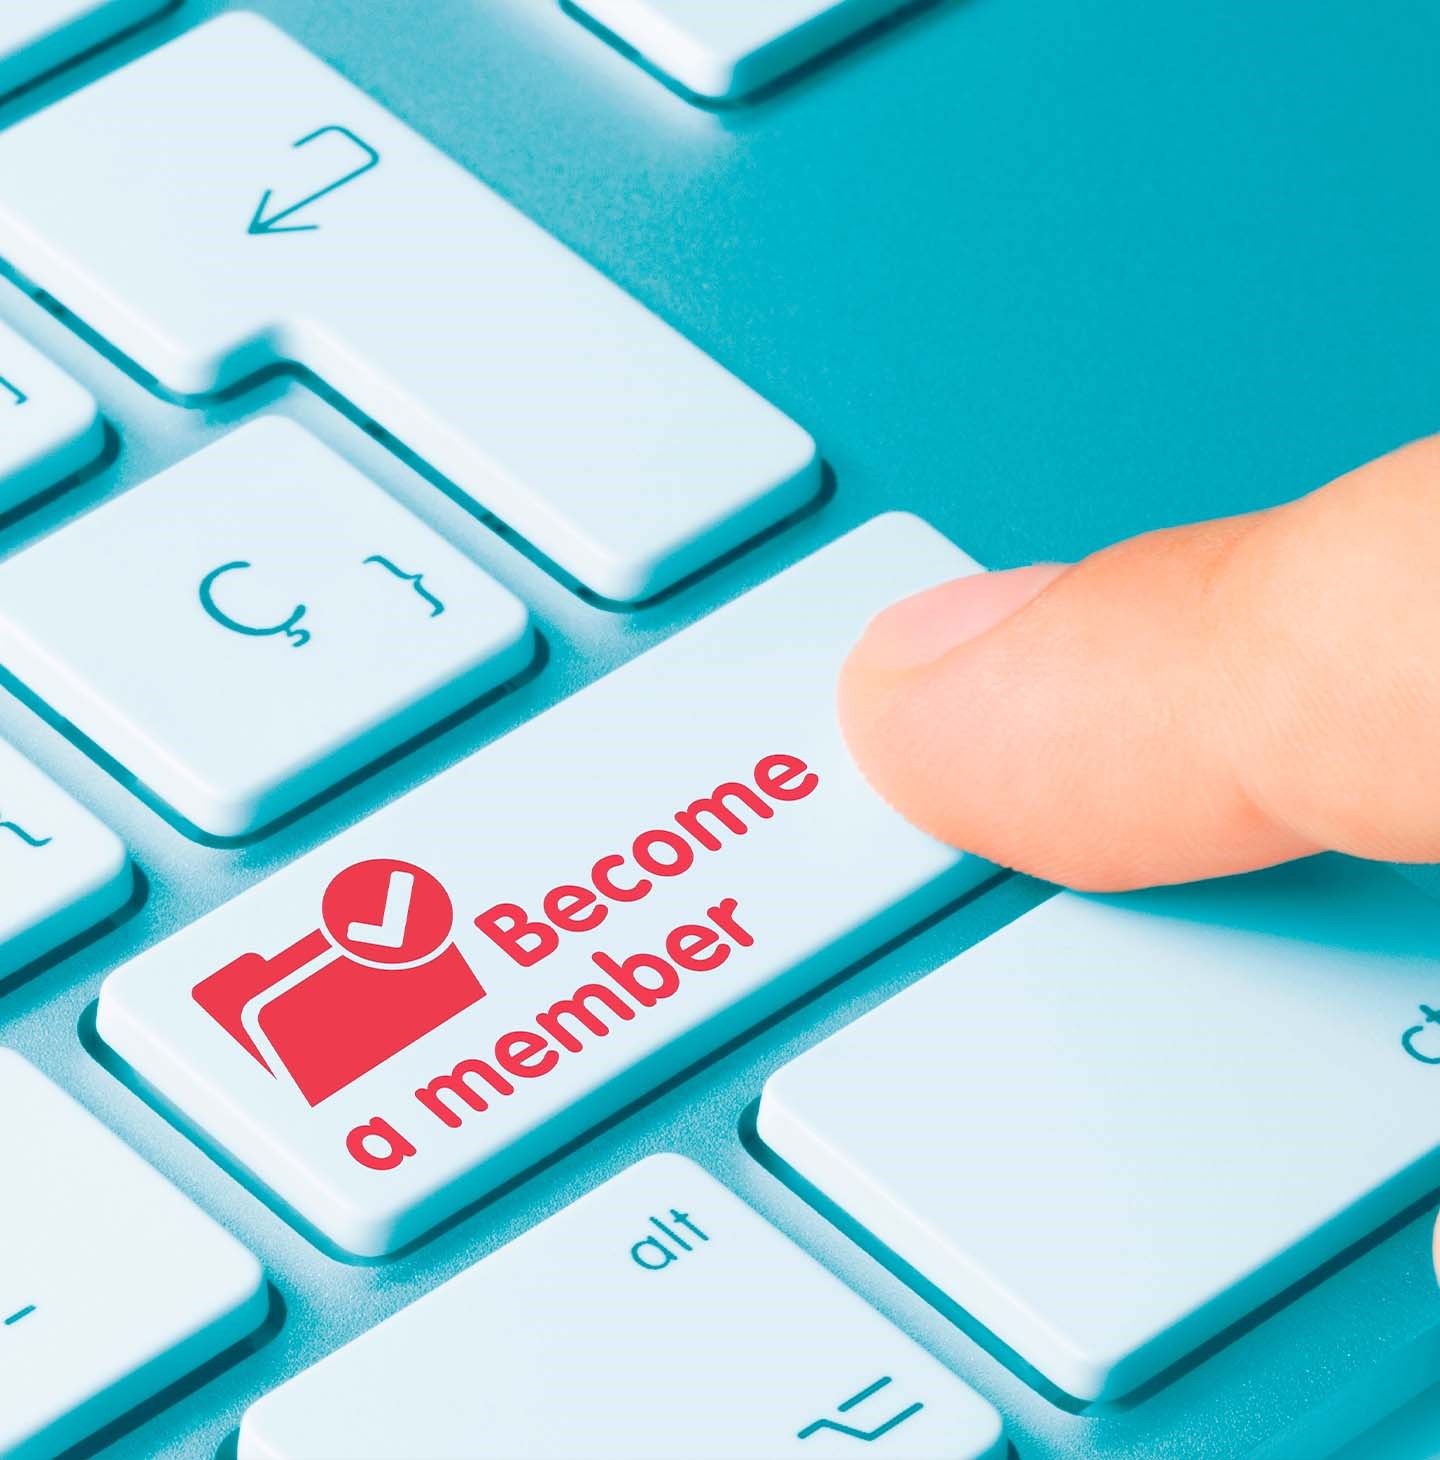 Right side of a computer keyboard with a finger about to press the "Become a member" key written in red.